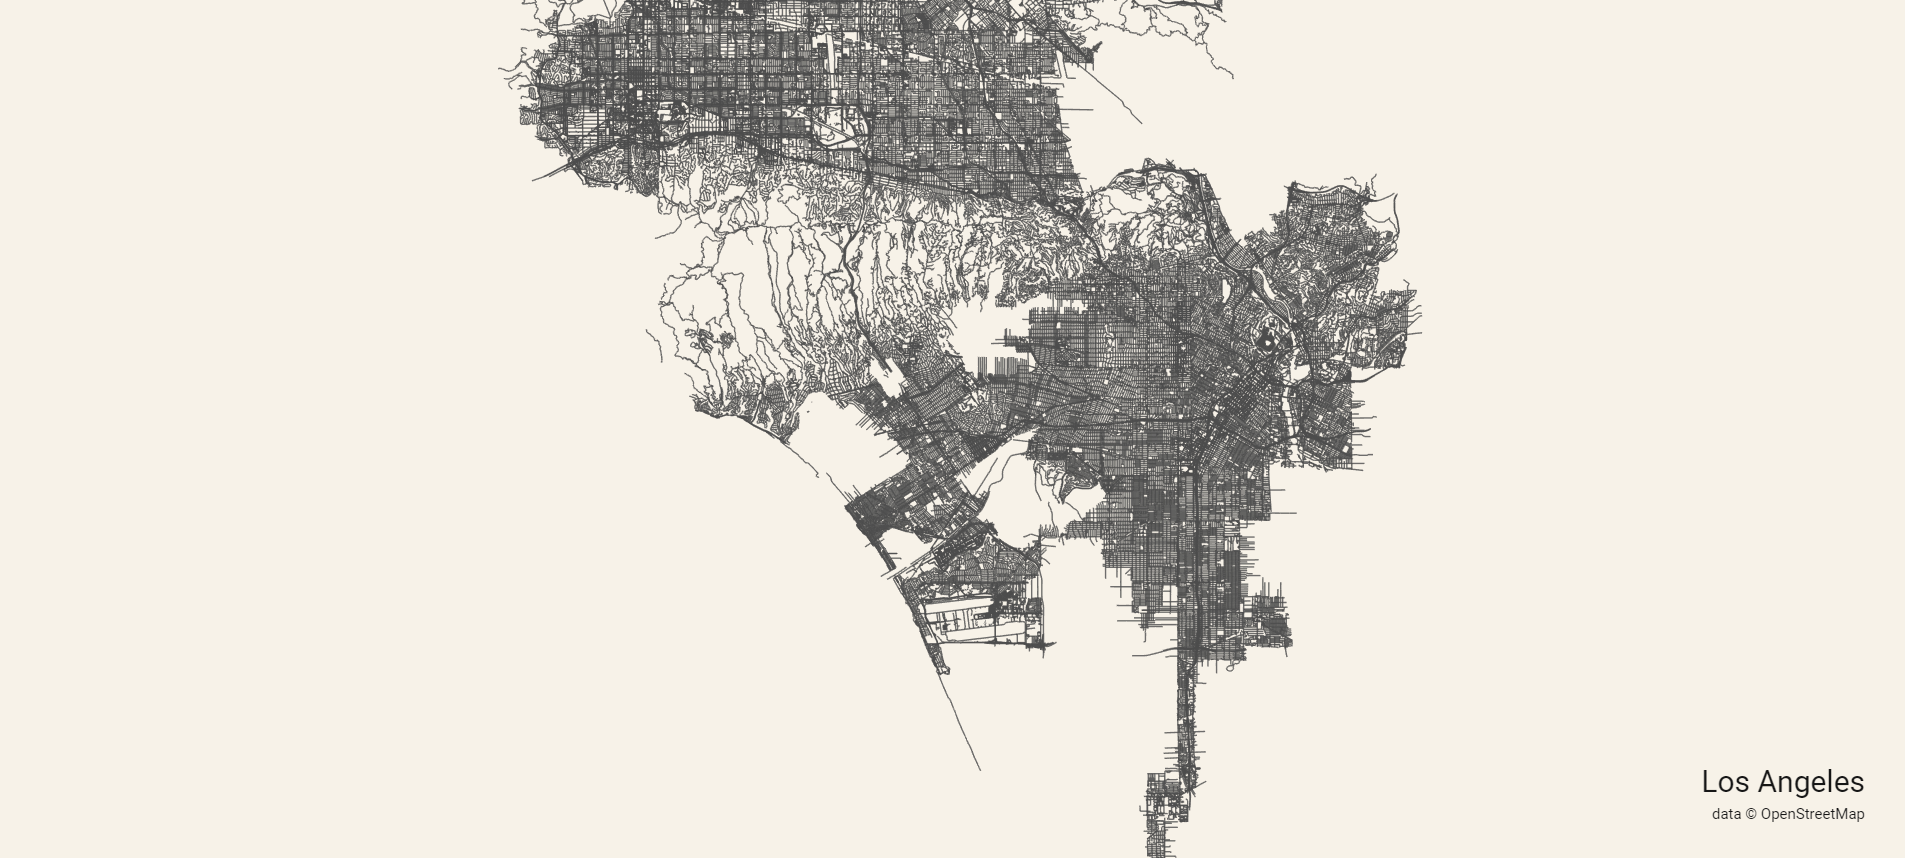 Map City Roads Of Los Angeles Oc Andrei Kashcha S City Roads Tool Will Draw You A Map Of Just The Roads In Any City Around The World Https Anvaka Github Io City Roads Infographic Tv